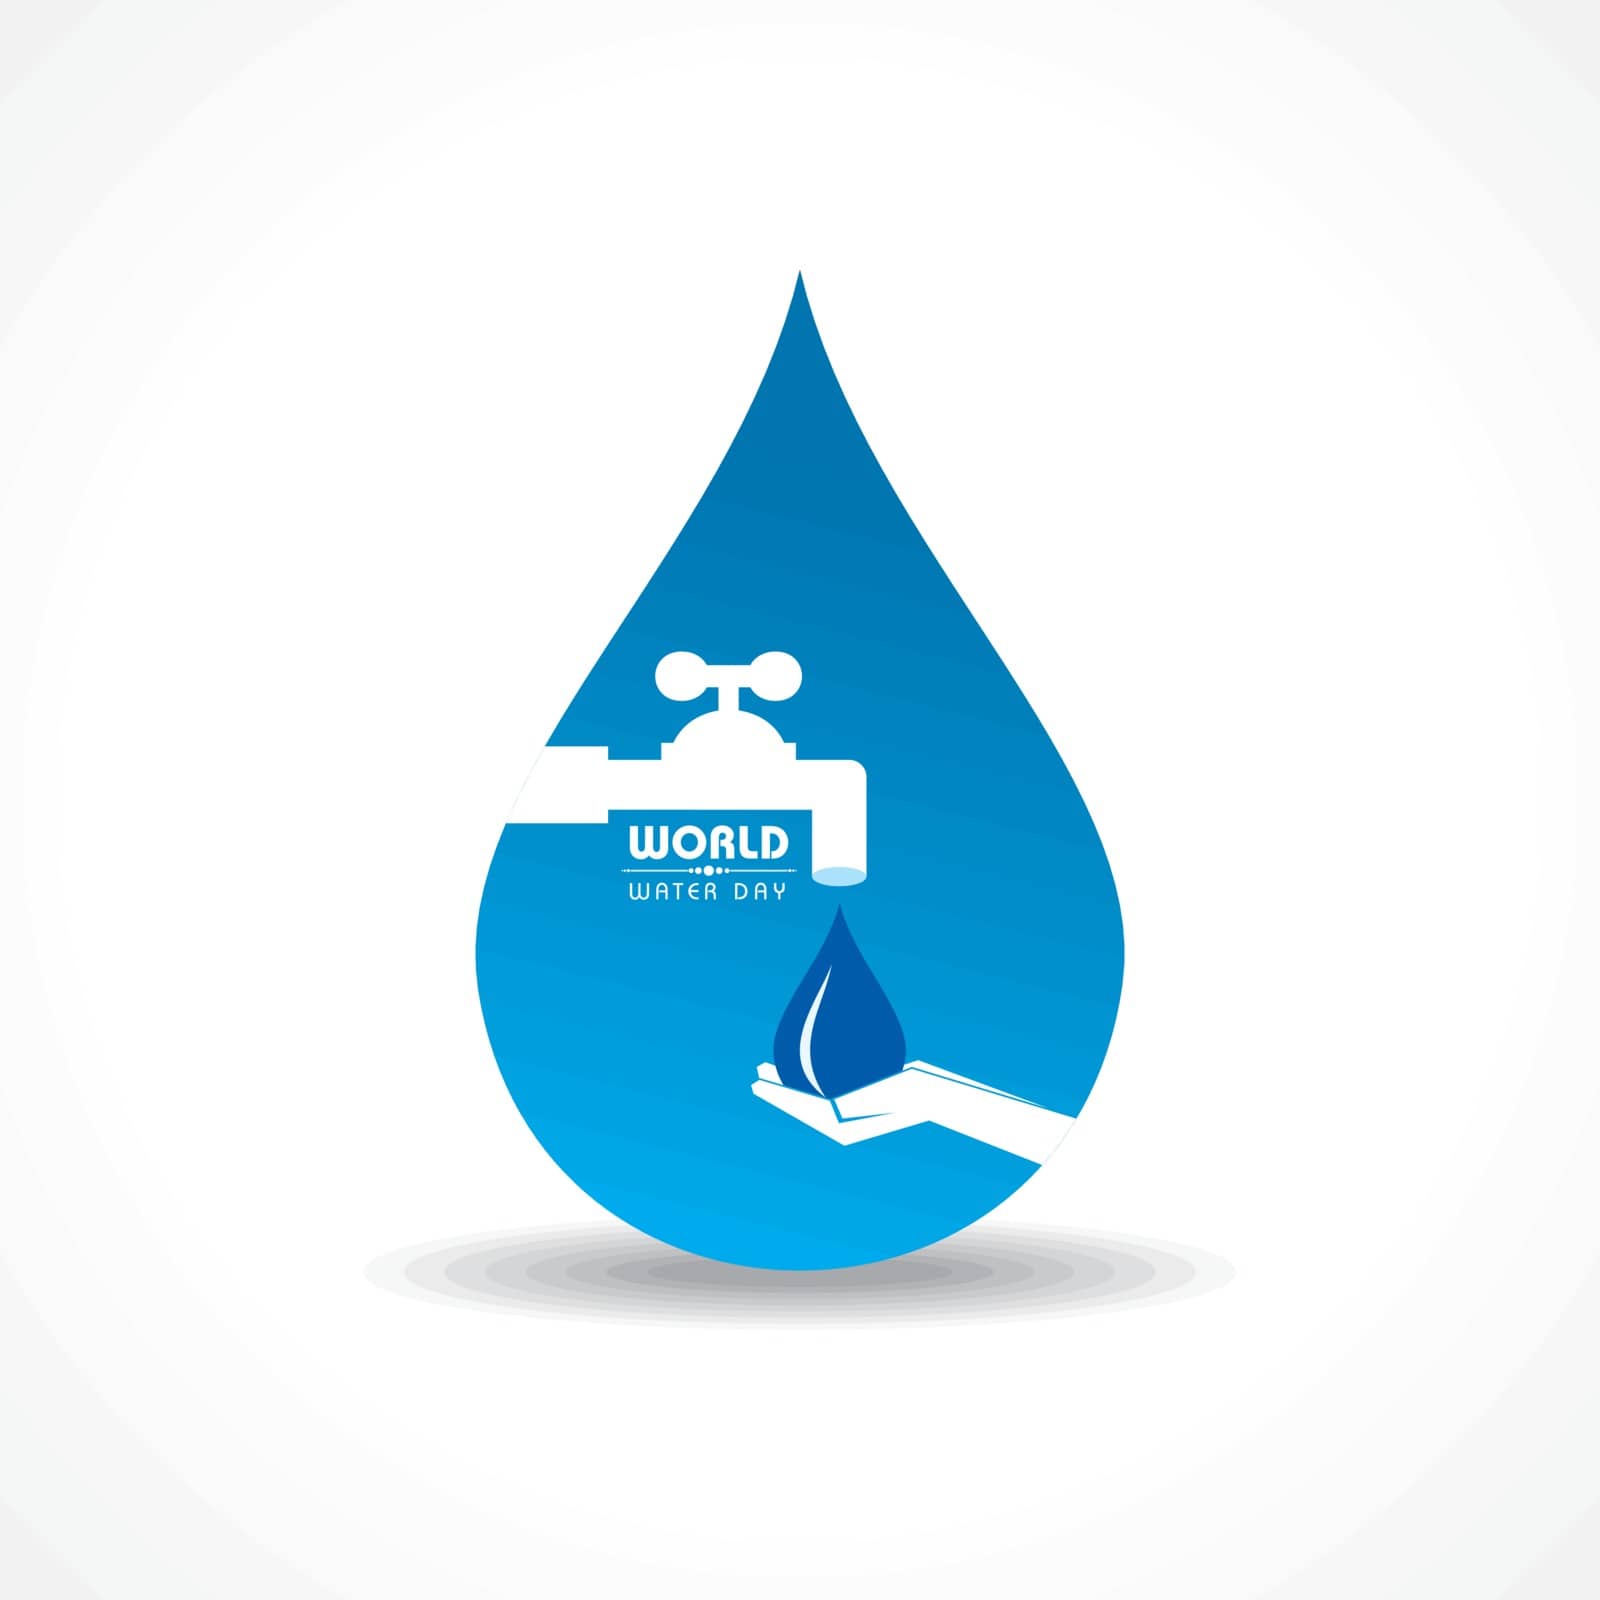 Save Nature Concept - World Water Day by graphicsdunia4you